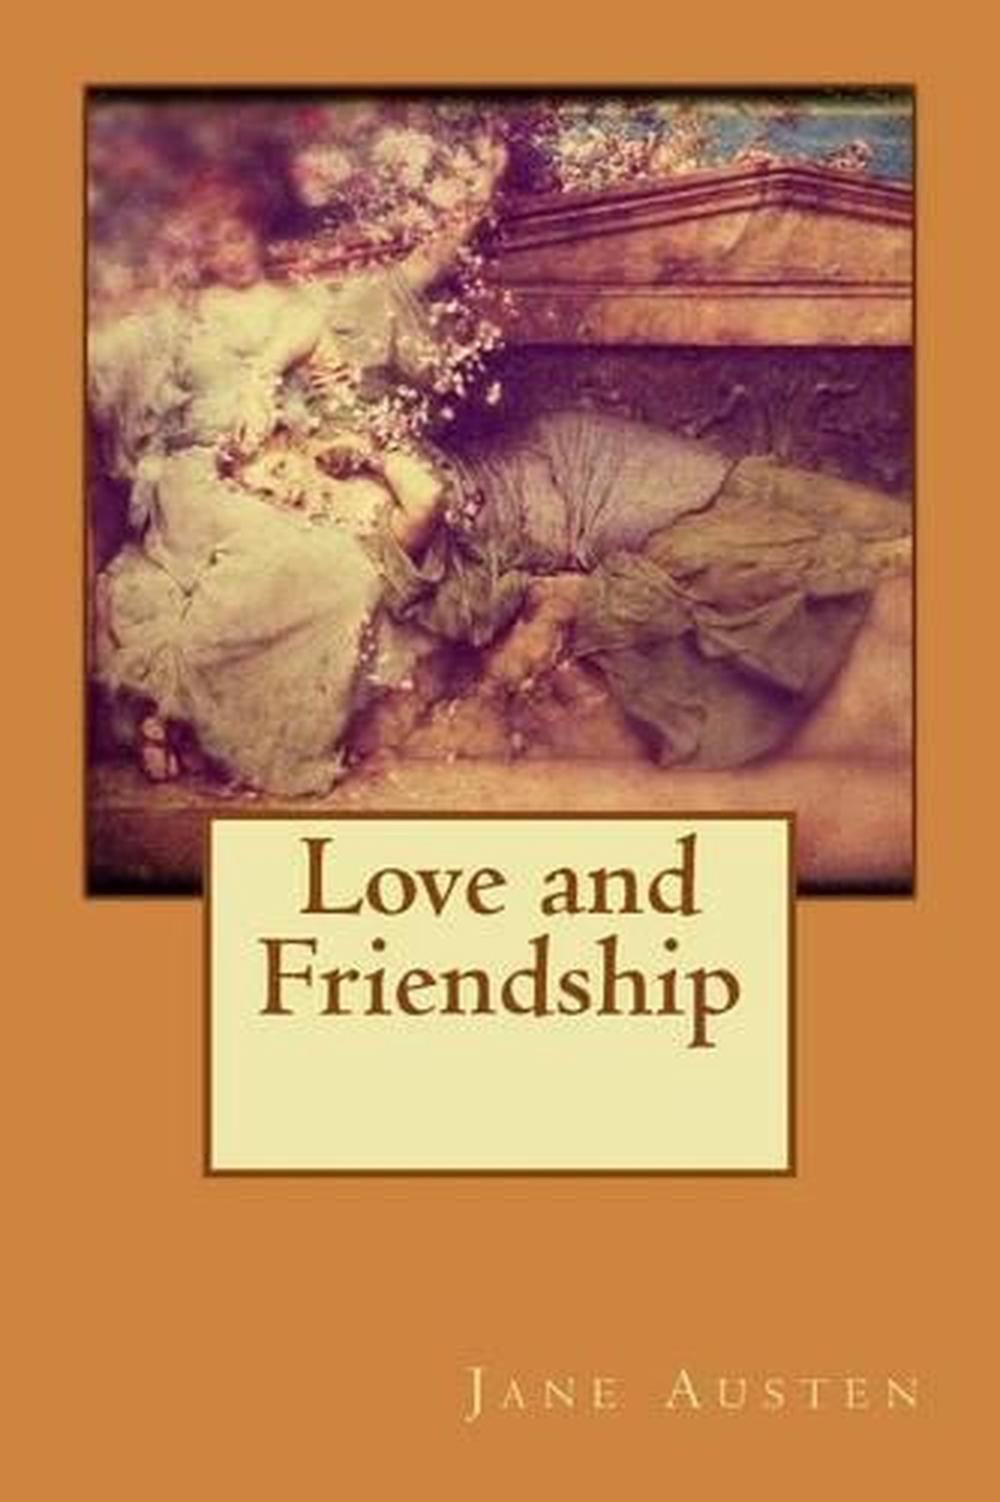 love and friendship book summary